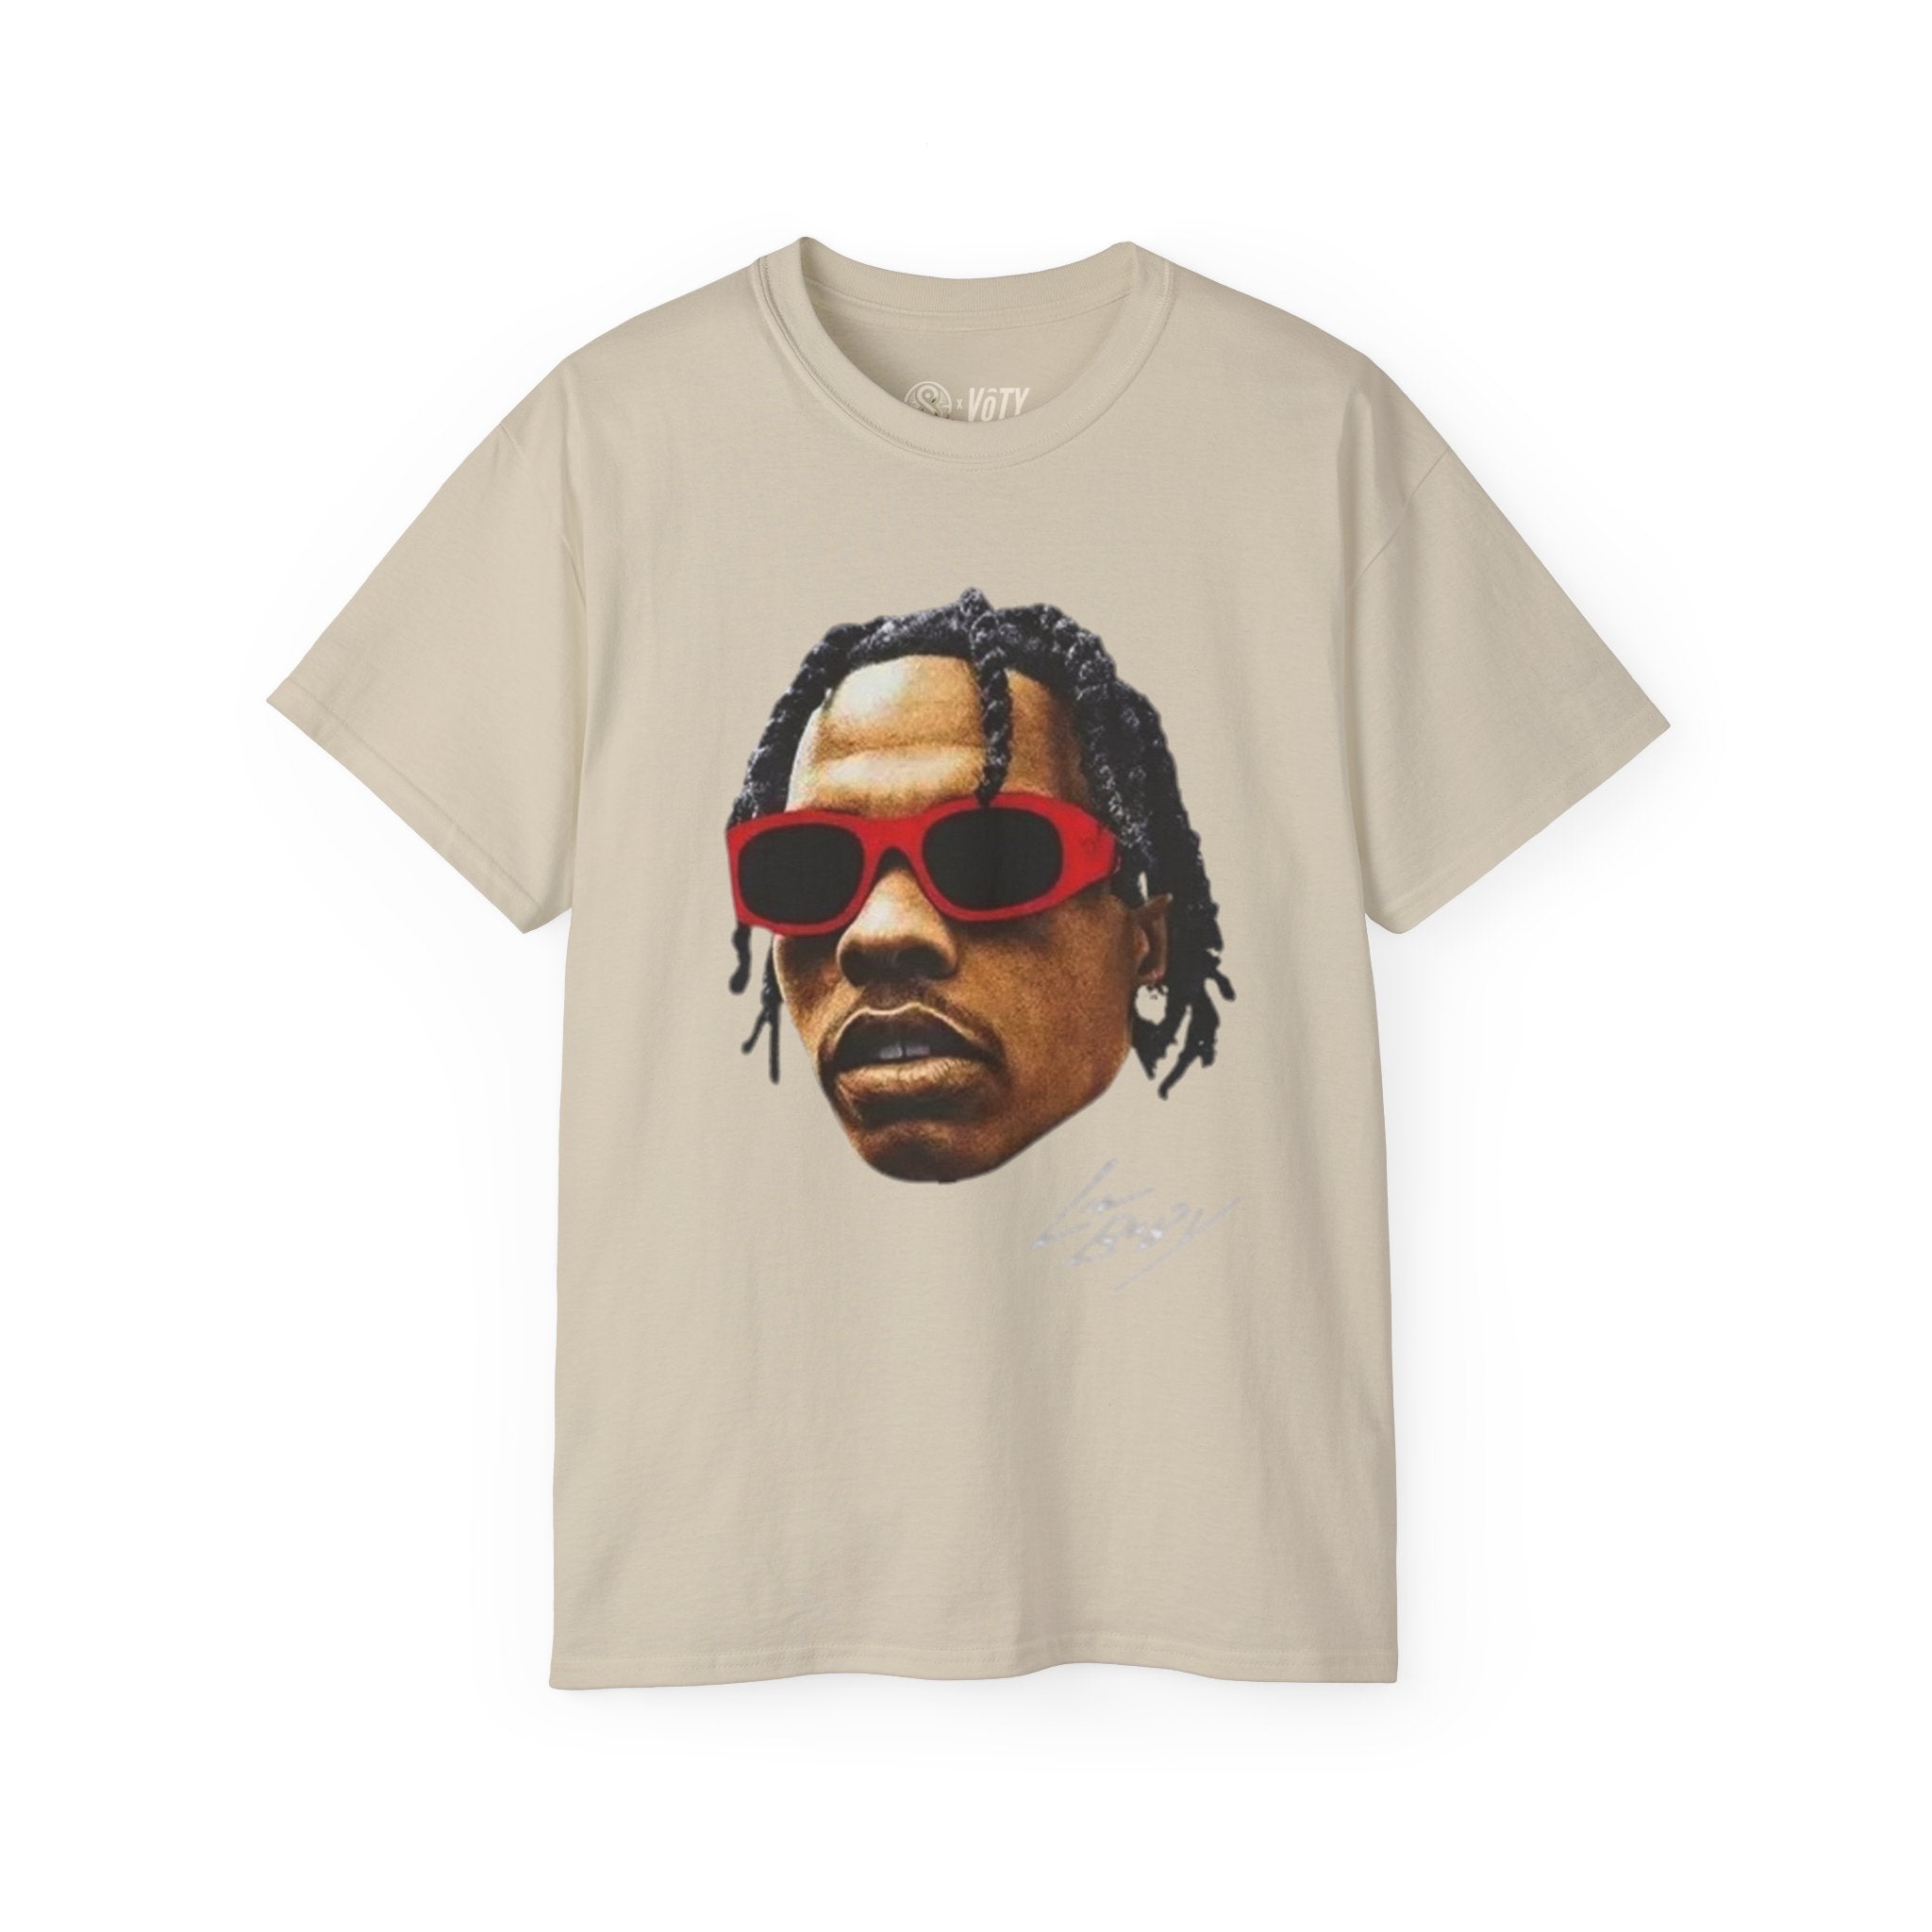 Lil Baby T-Shirt